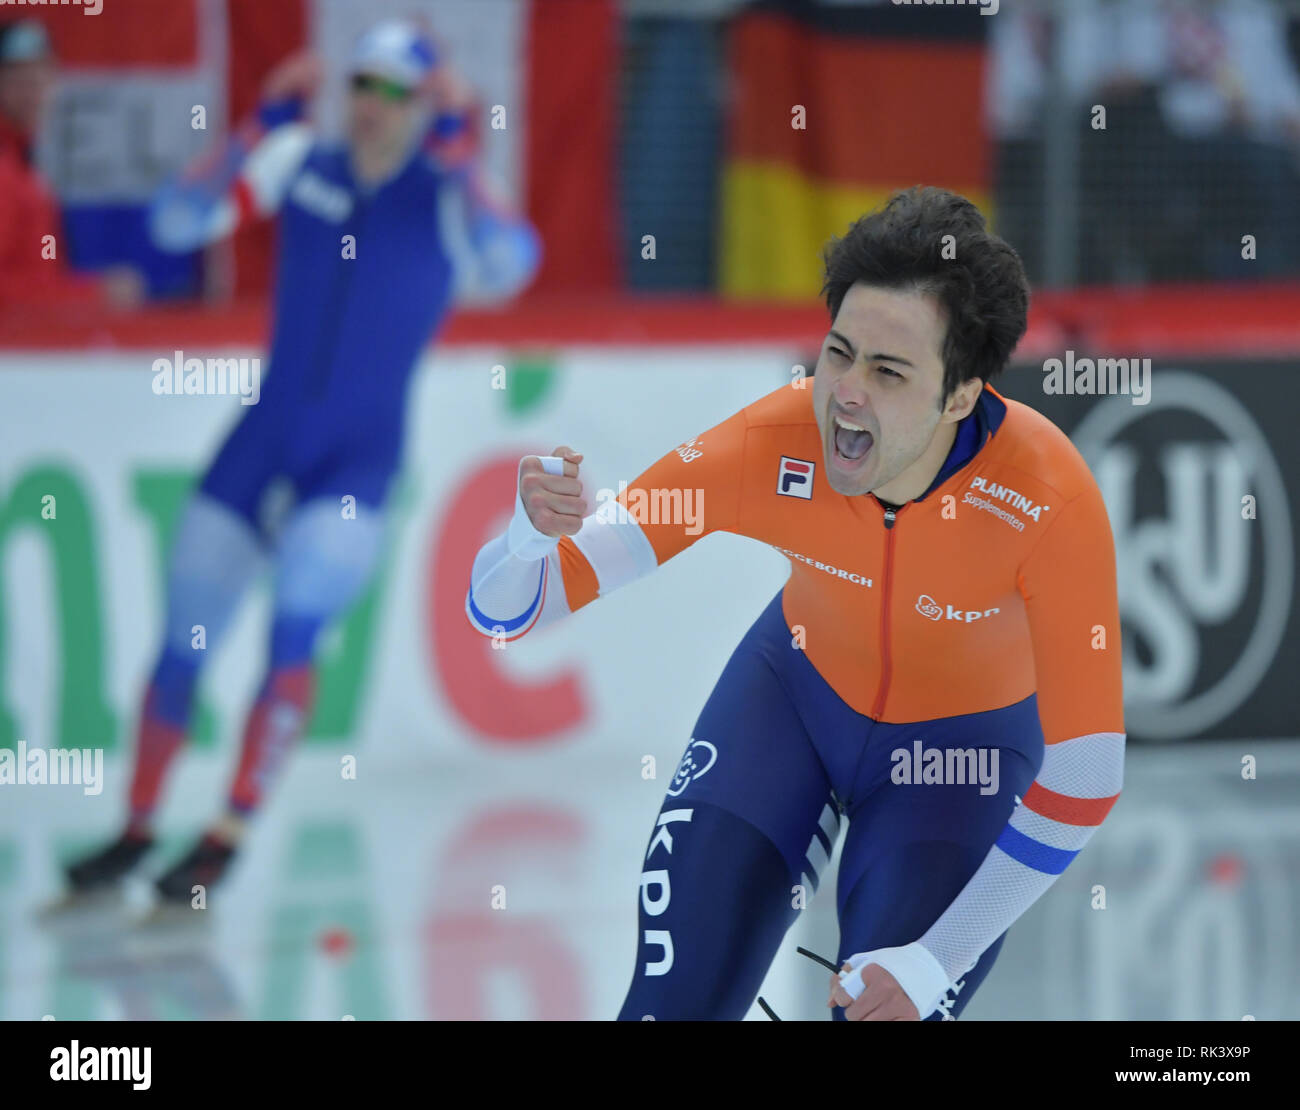 Inzell, Germany. 09th Feb, 2019. Speed skating WM, 1000 m, men, Kai Verbij  from the Netherlands cheers after his run. The European Champion won with a  track record of 1:07.39 minutes. Credit: